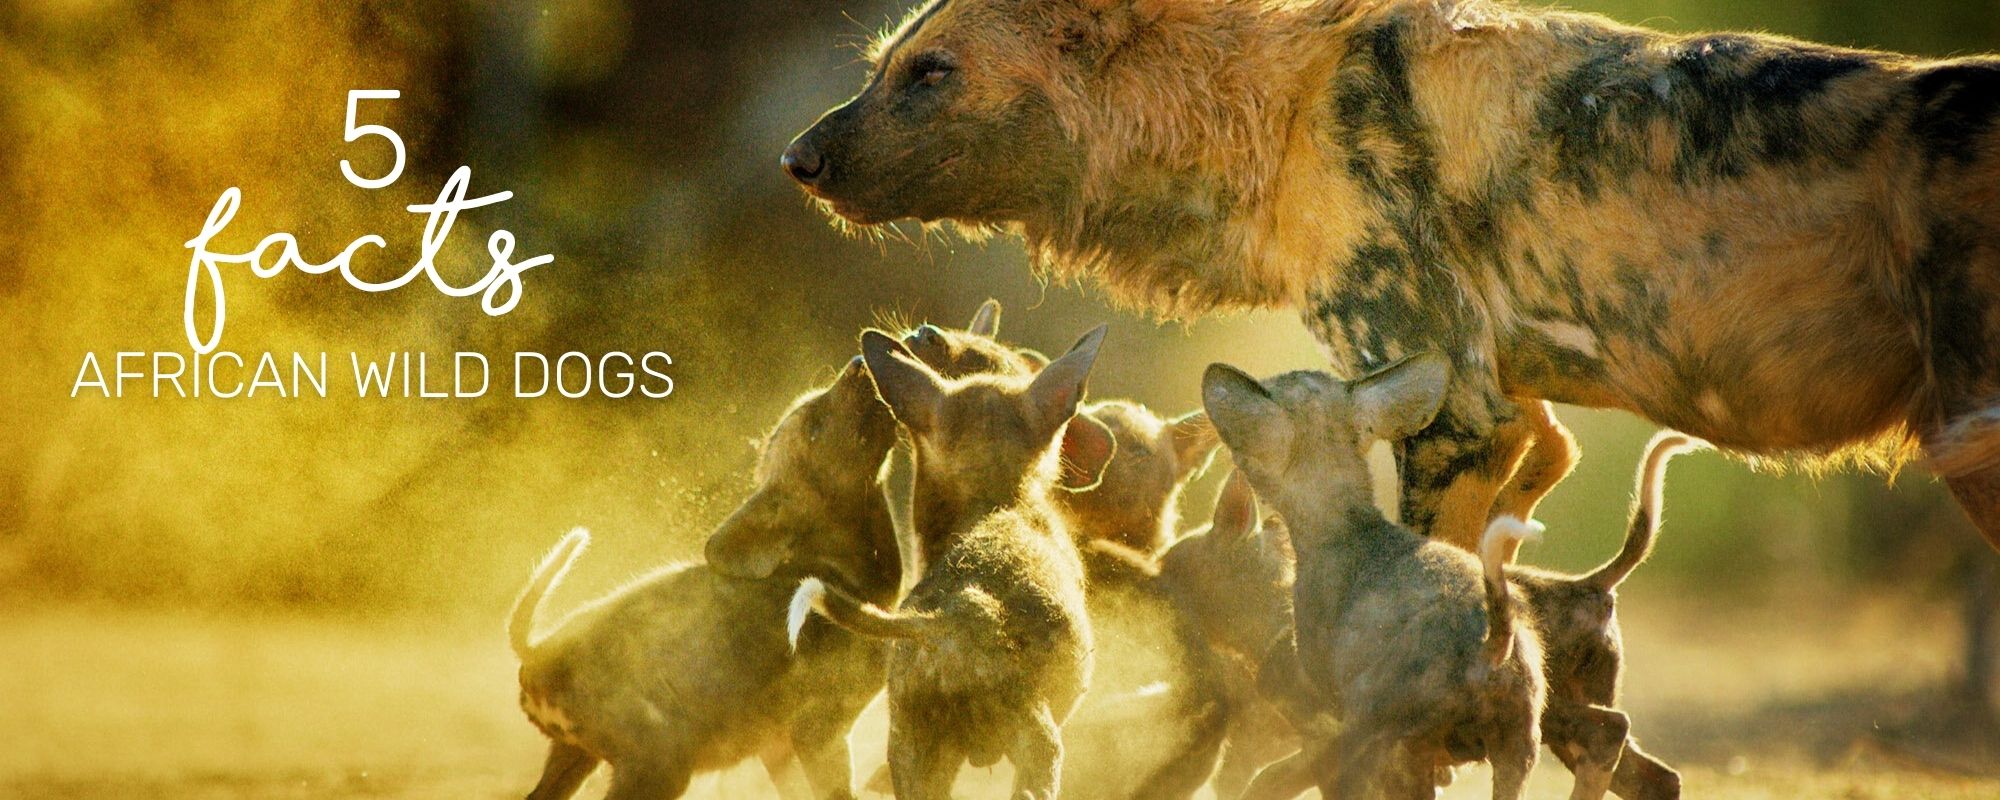 5 INCREDIBLE FACTS ABOUT AFRICAN WILD DOGS